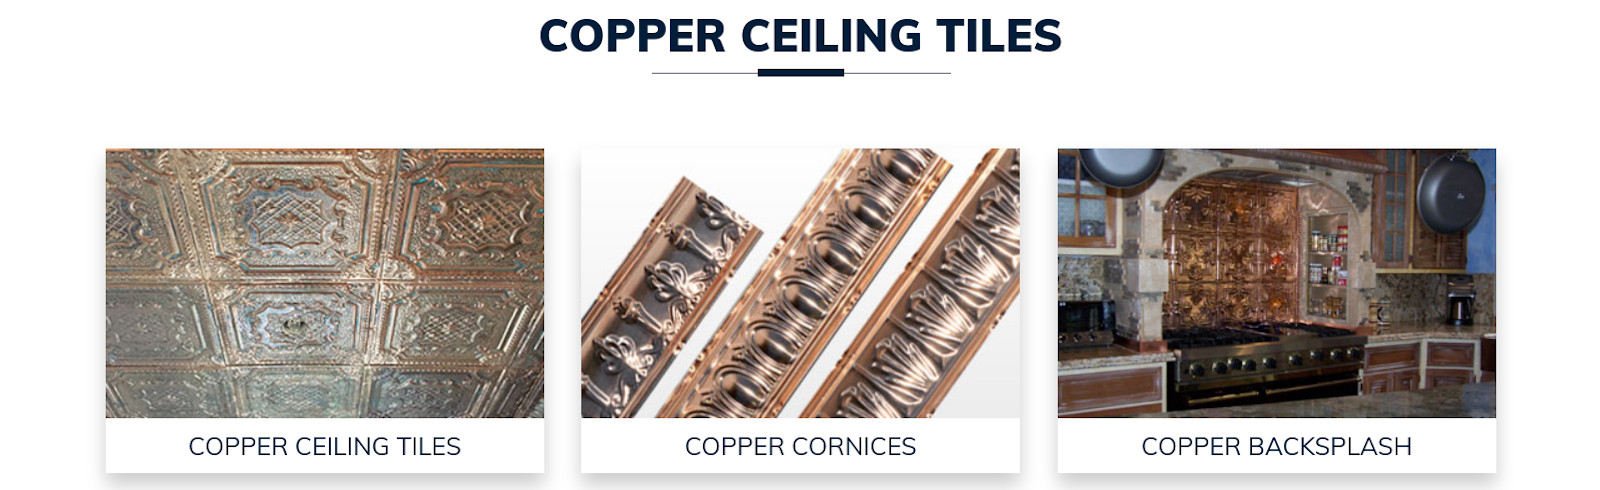 copper ceiling tiles low-cost